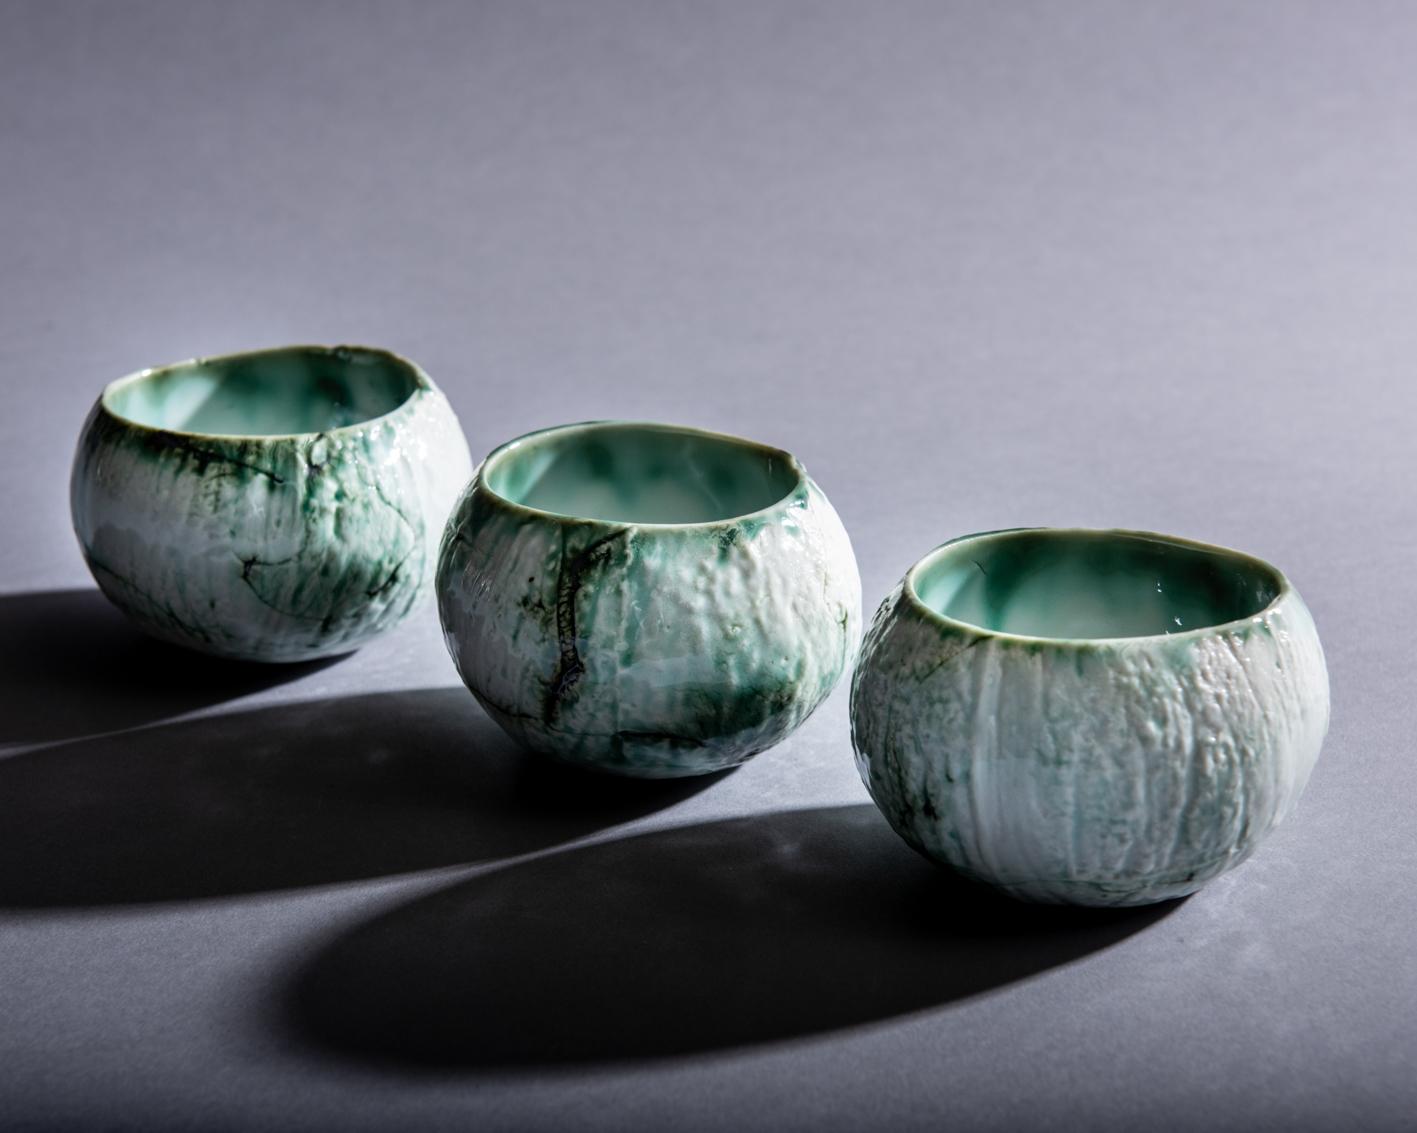 English “Coconuts” Contemporary Coconut Cup by Studio Morison for General Life